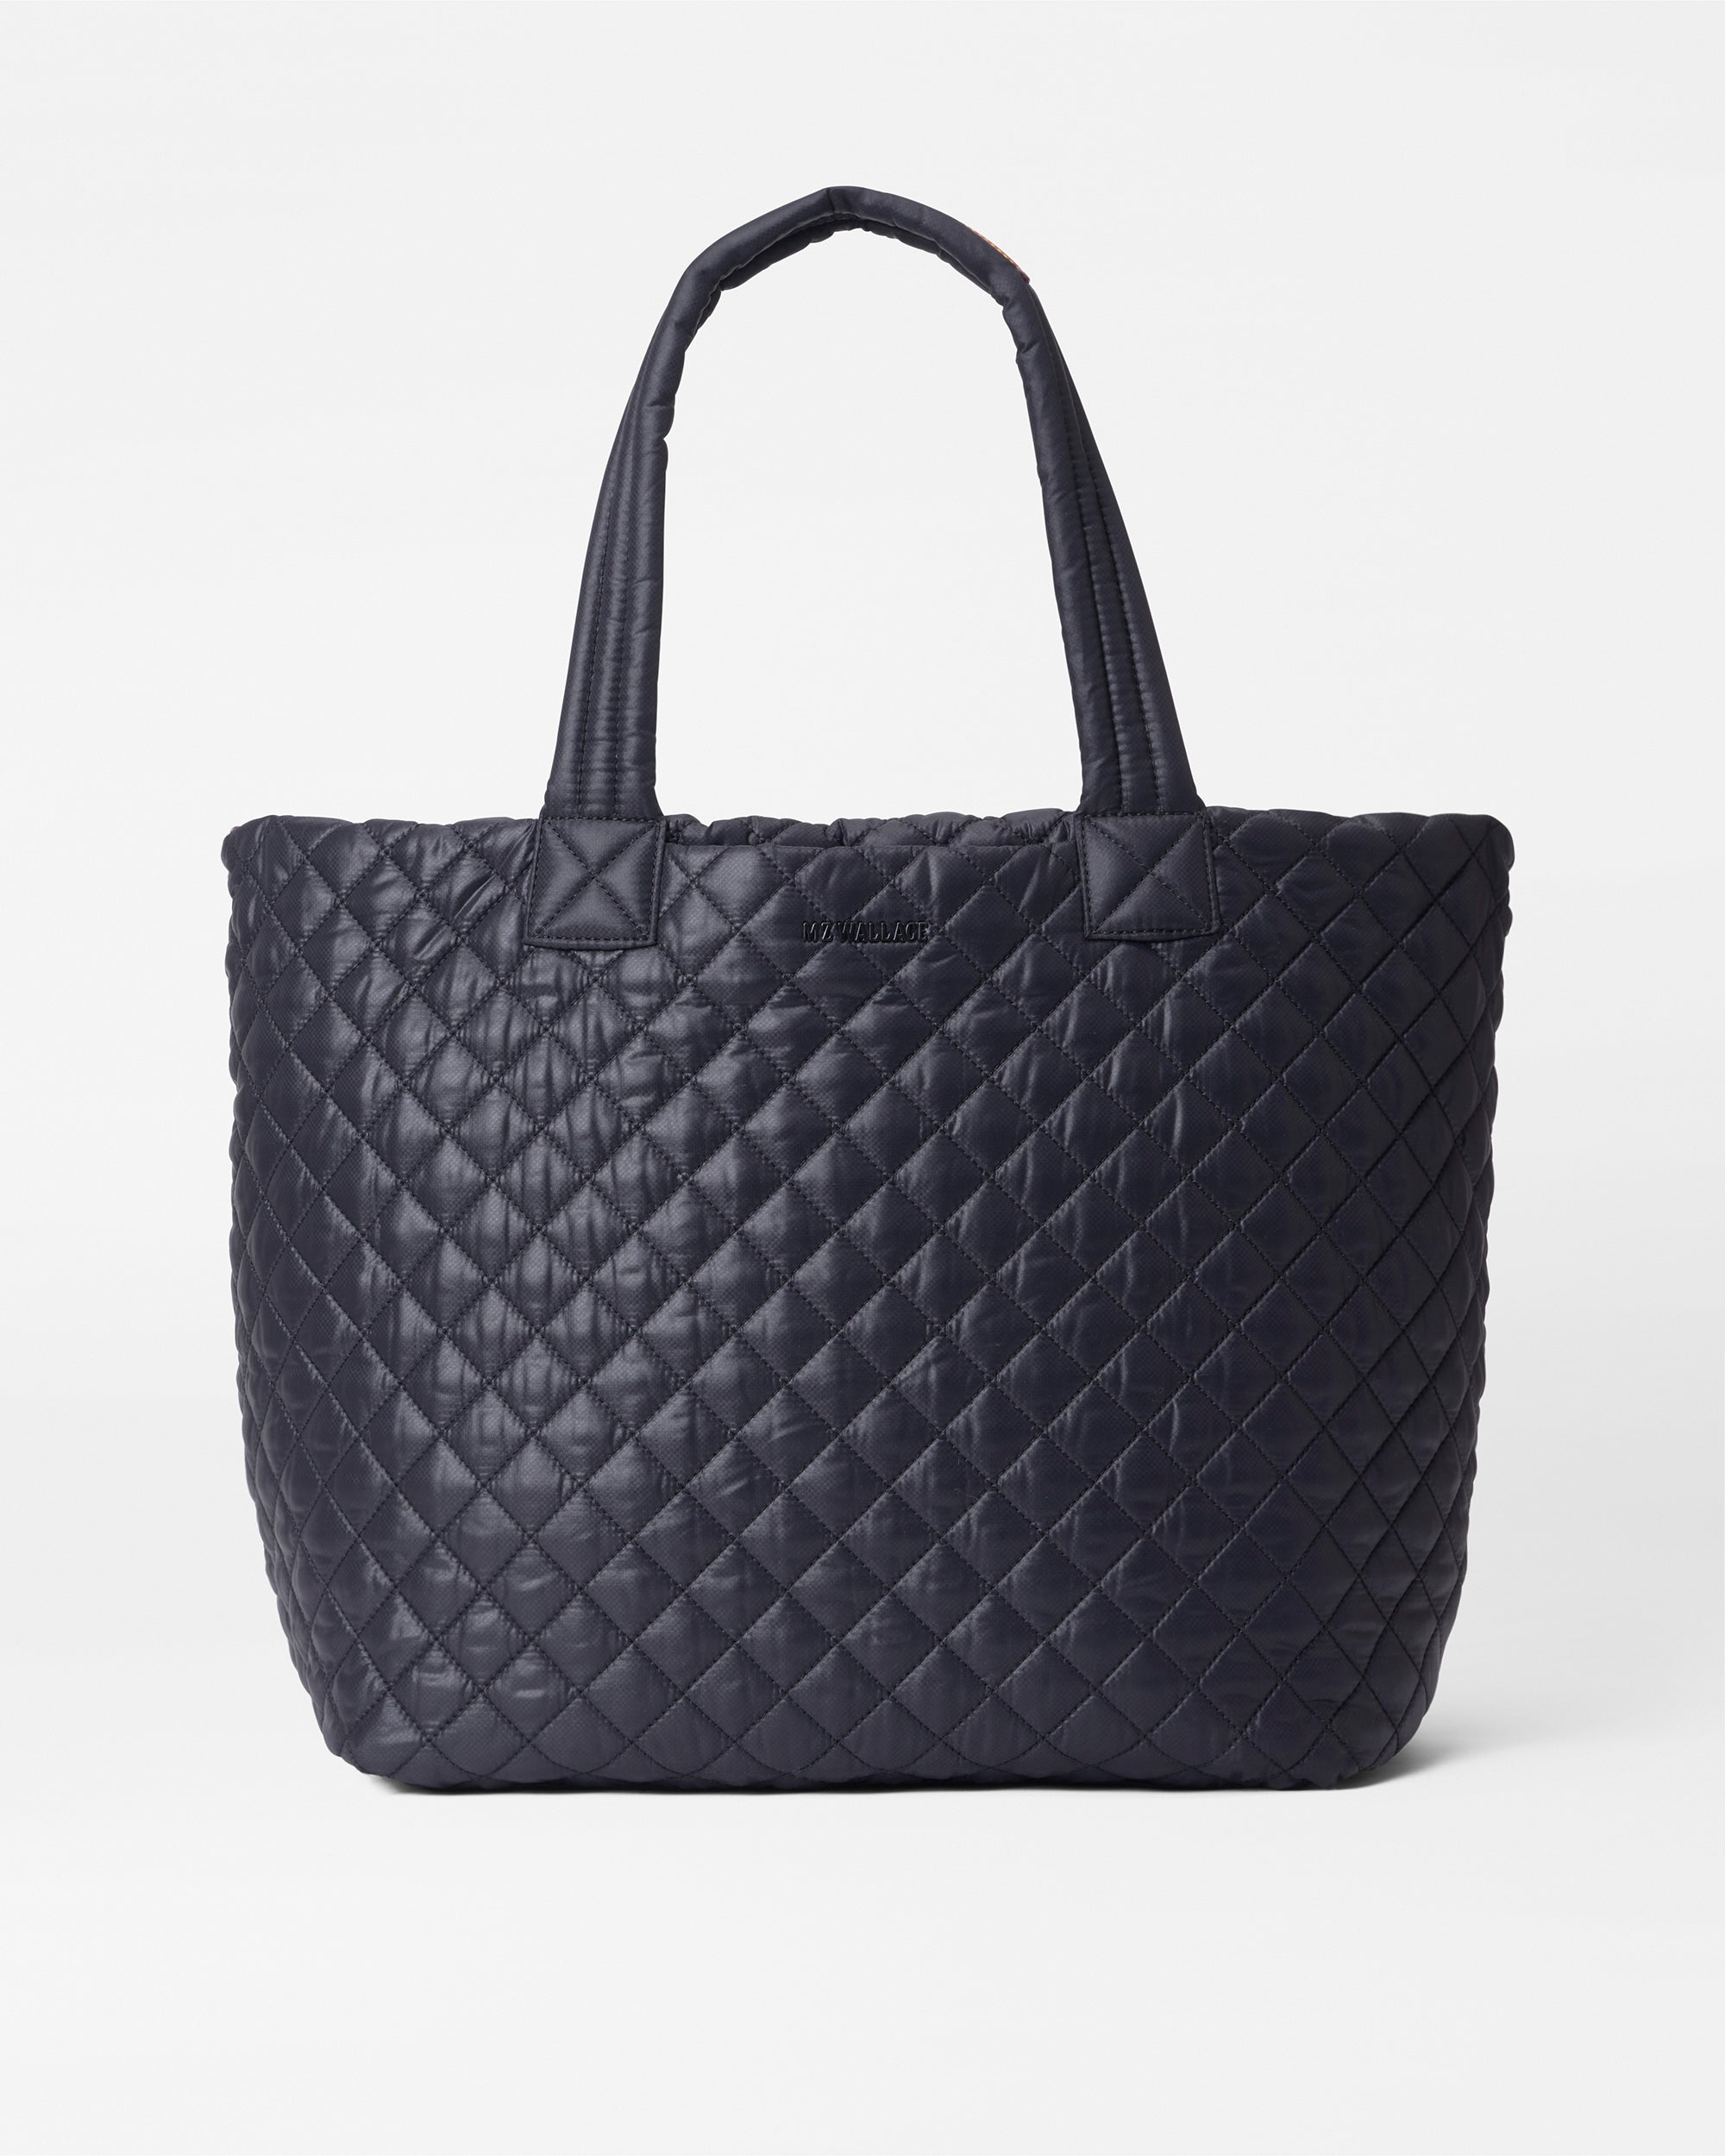 mz wallace tote